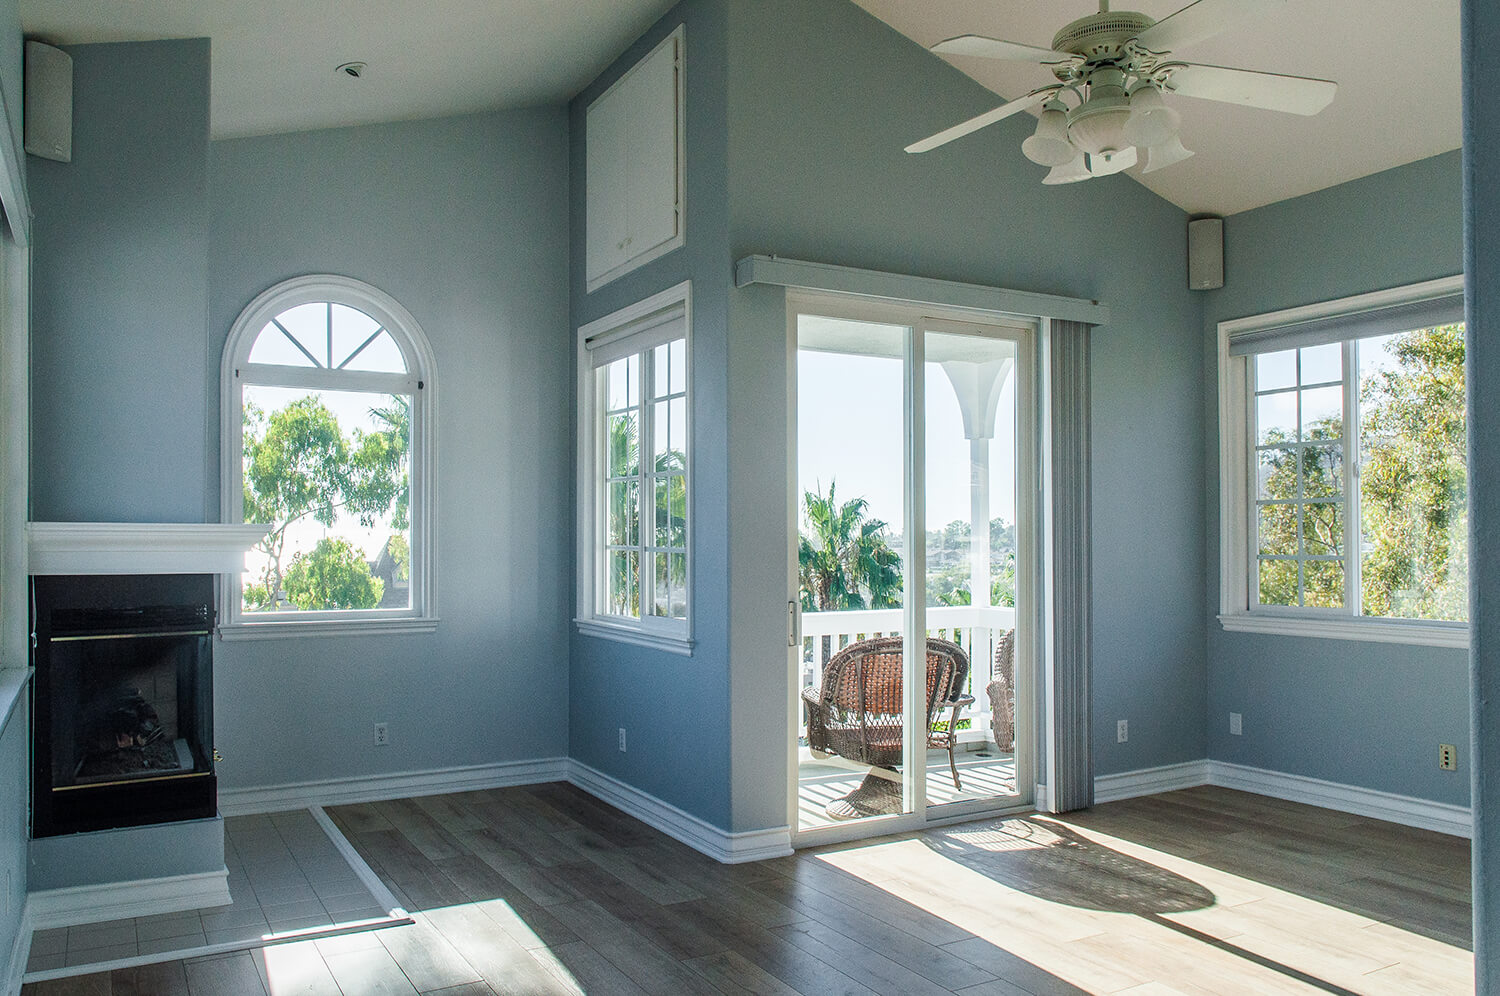 Selling my Florida home fast after a breakup